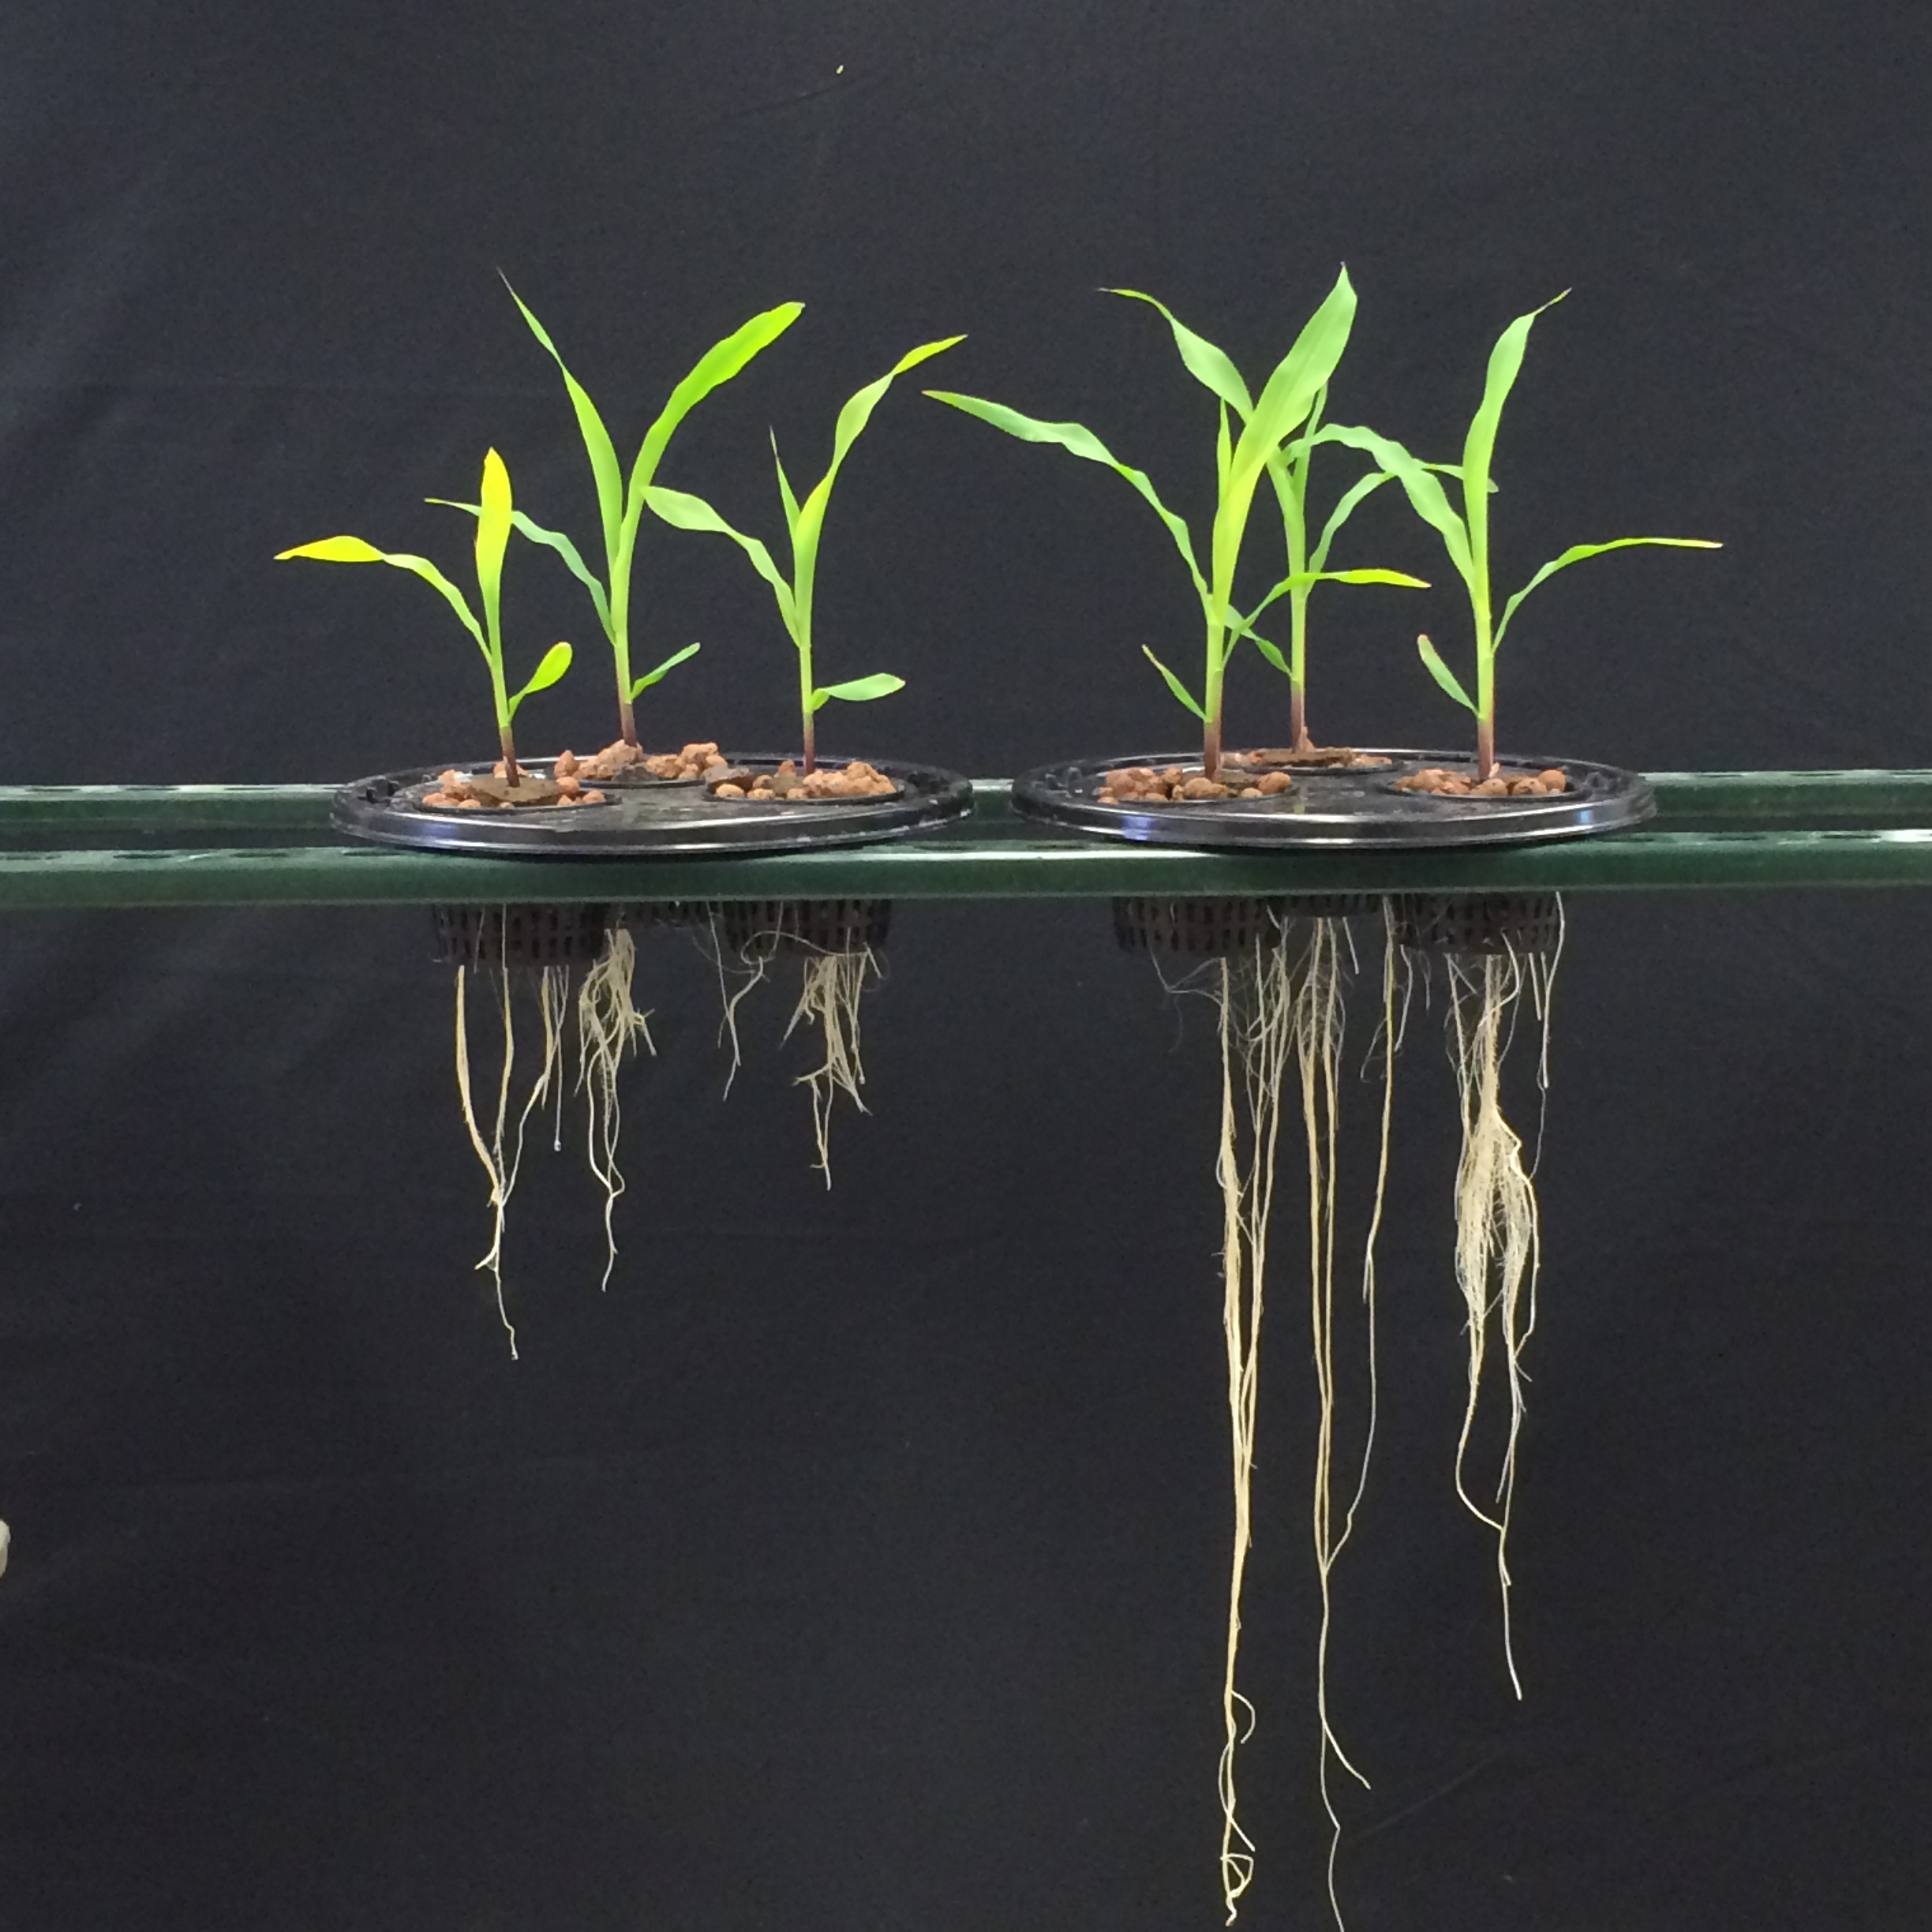 The BioAg Alliance Readies New Microbial Solution to Improve Corn Harvests